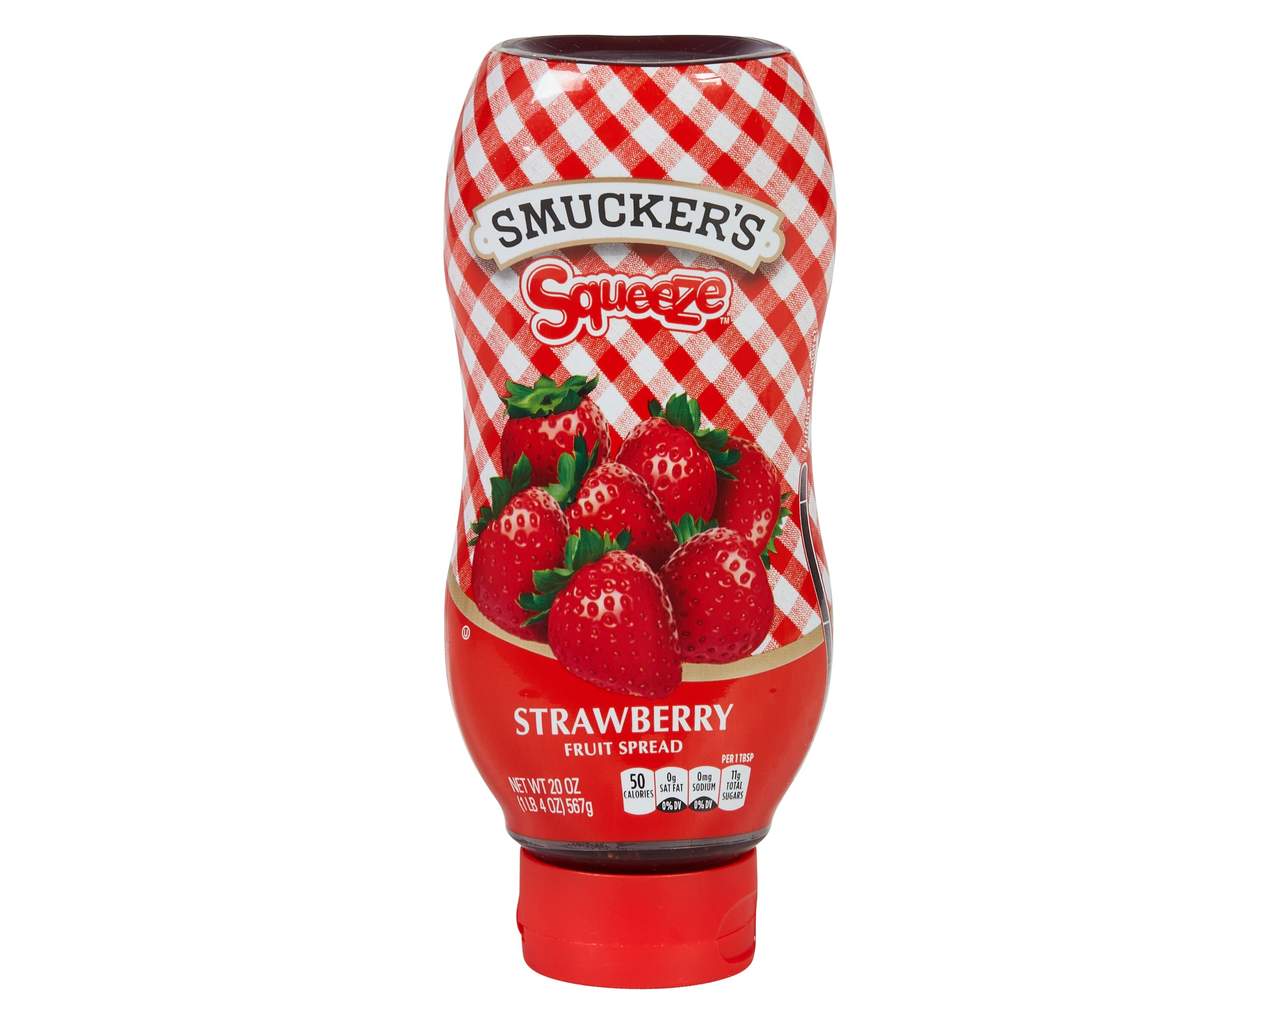 Smuckers Squeeze Fruit Spread Strawberry